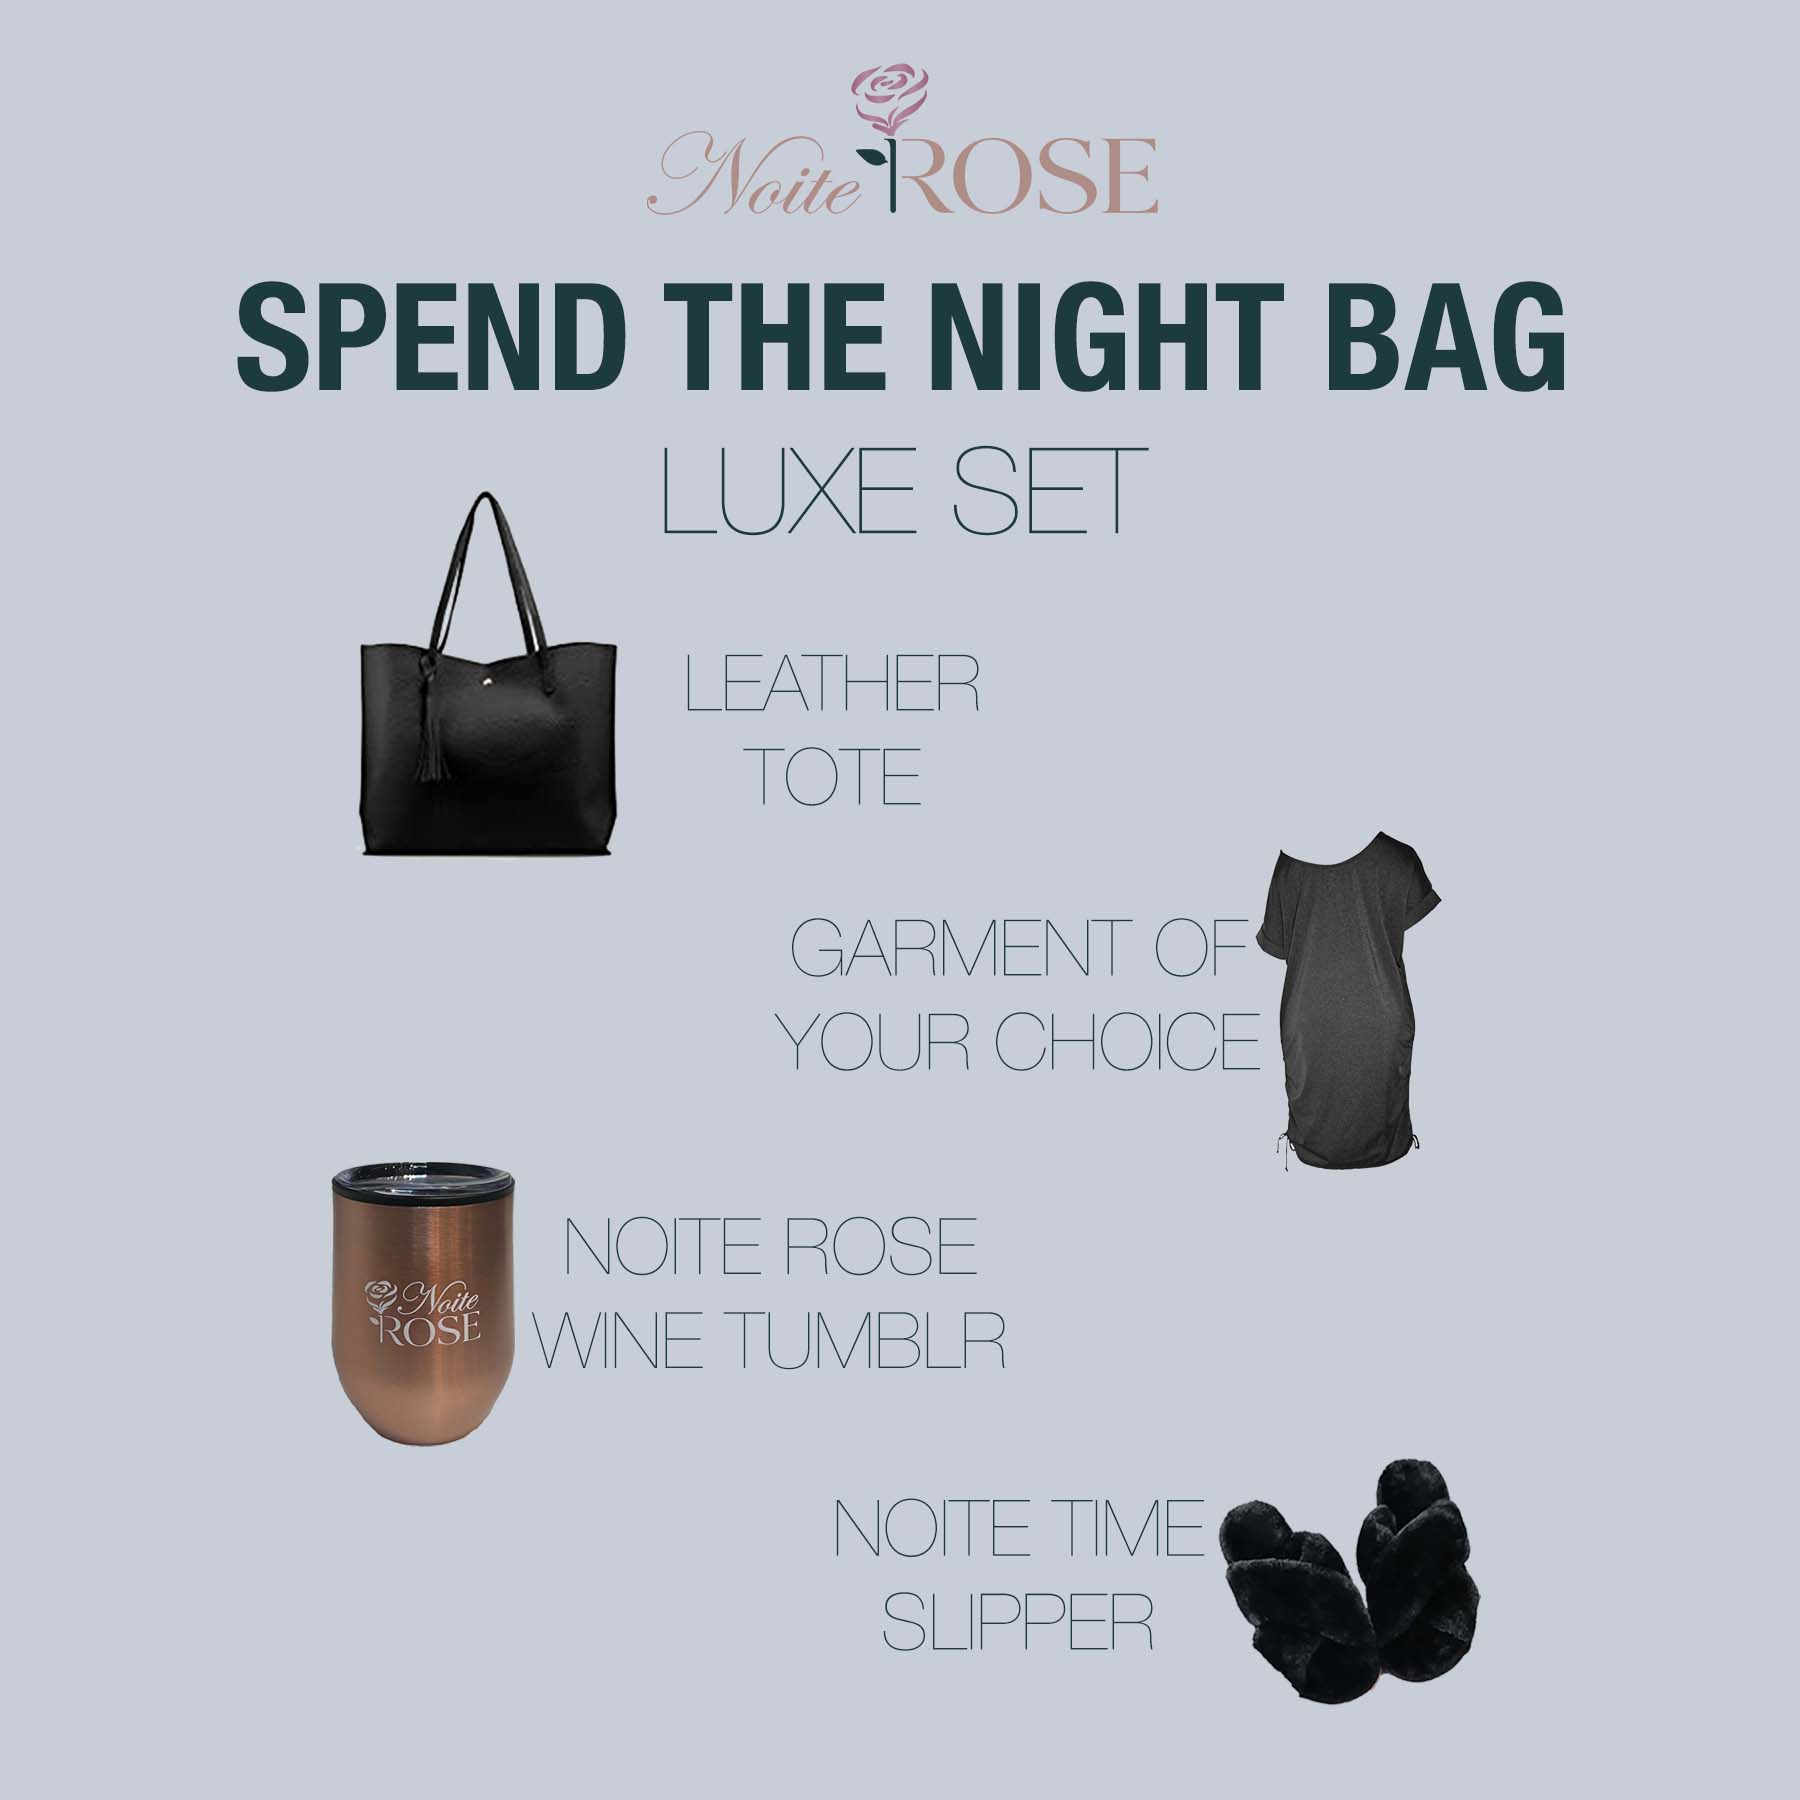 SPEND THE NIGHT BAGS